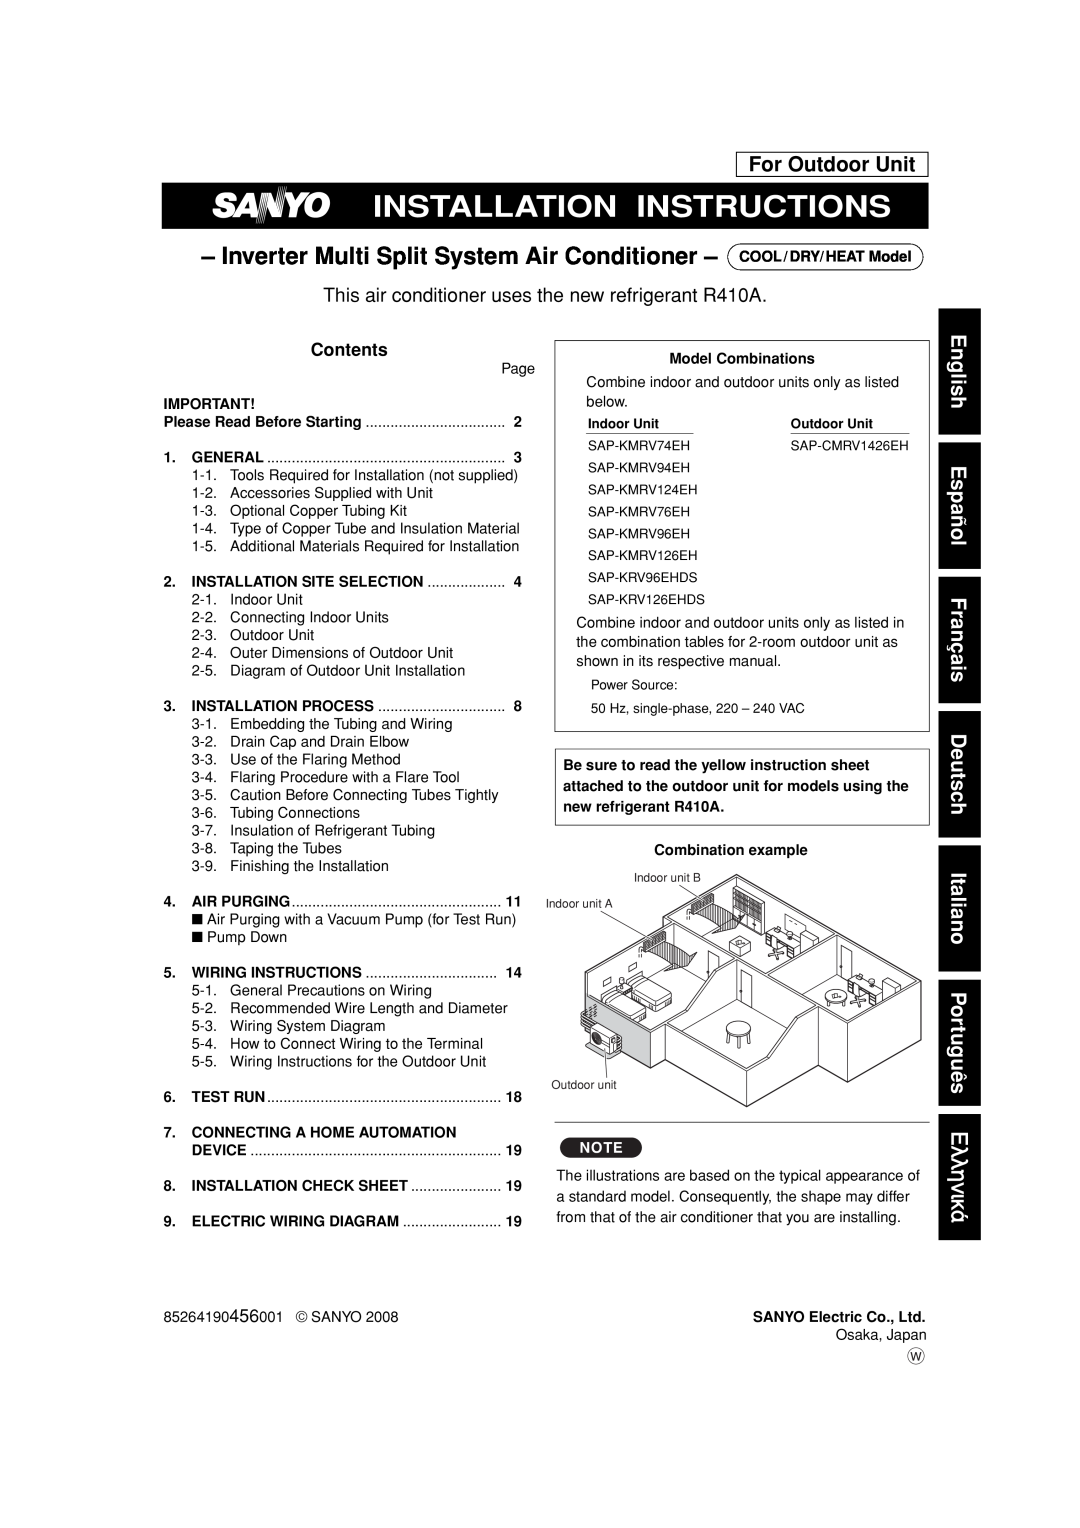 Sanyo SAP-CMRV1426EH-F Installation Instructions, For Outdoor Unit, Connecting A Home Automation, Installation Check Sheet 